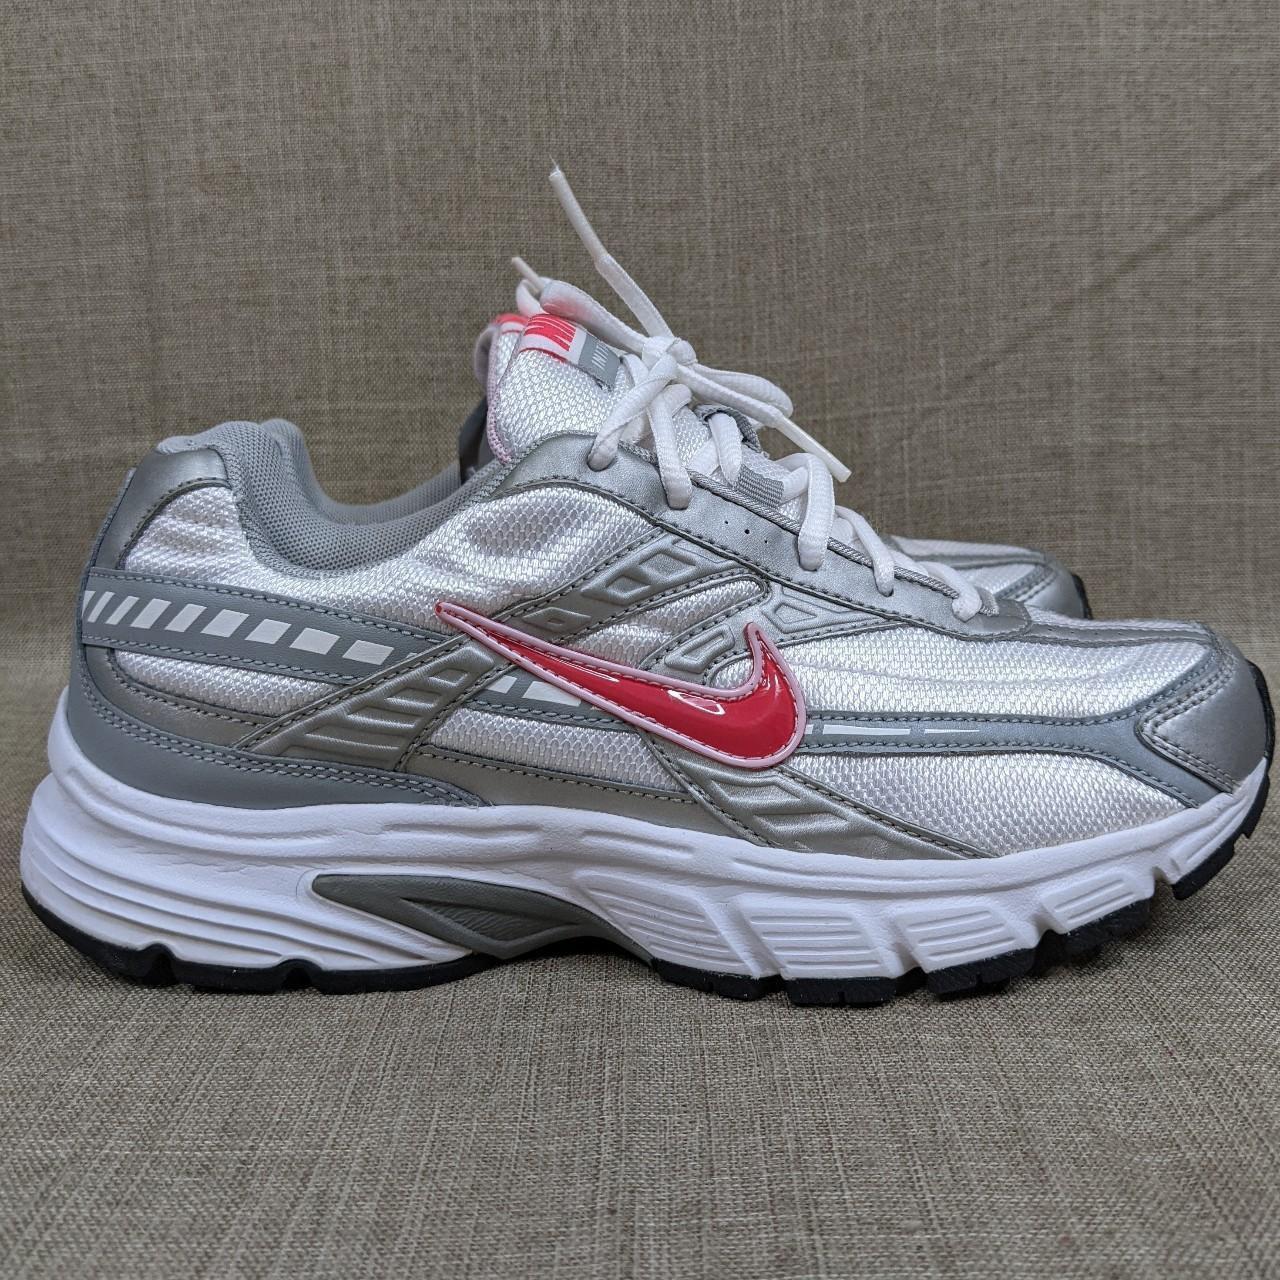 Product Image 1 - Nike women's chunky dad sneakers.

Women's